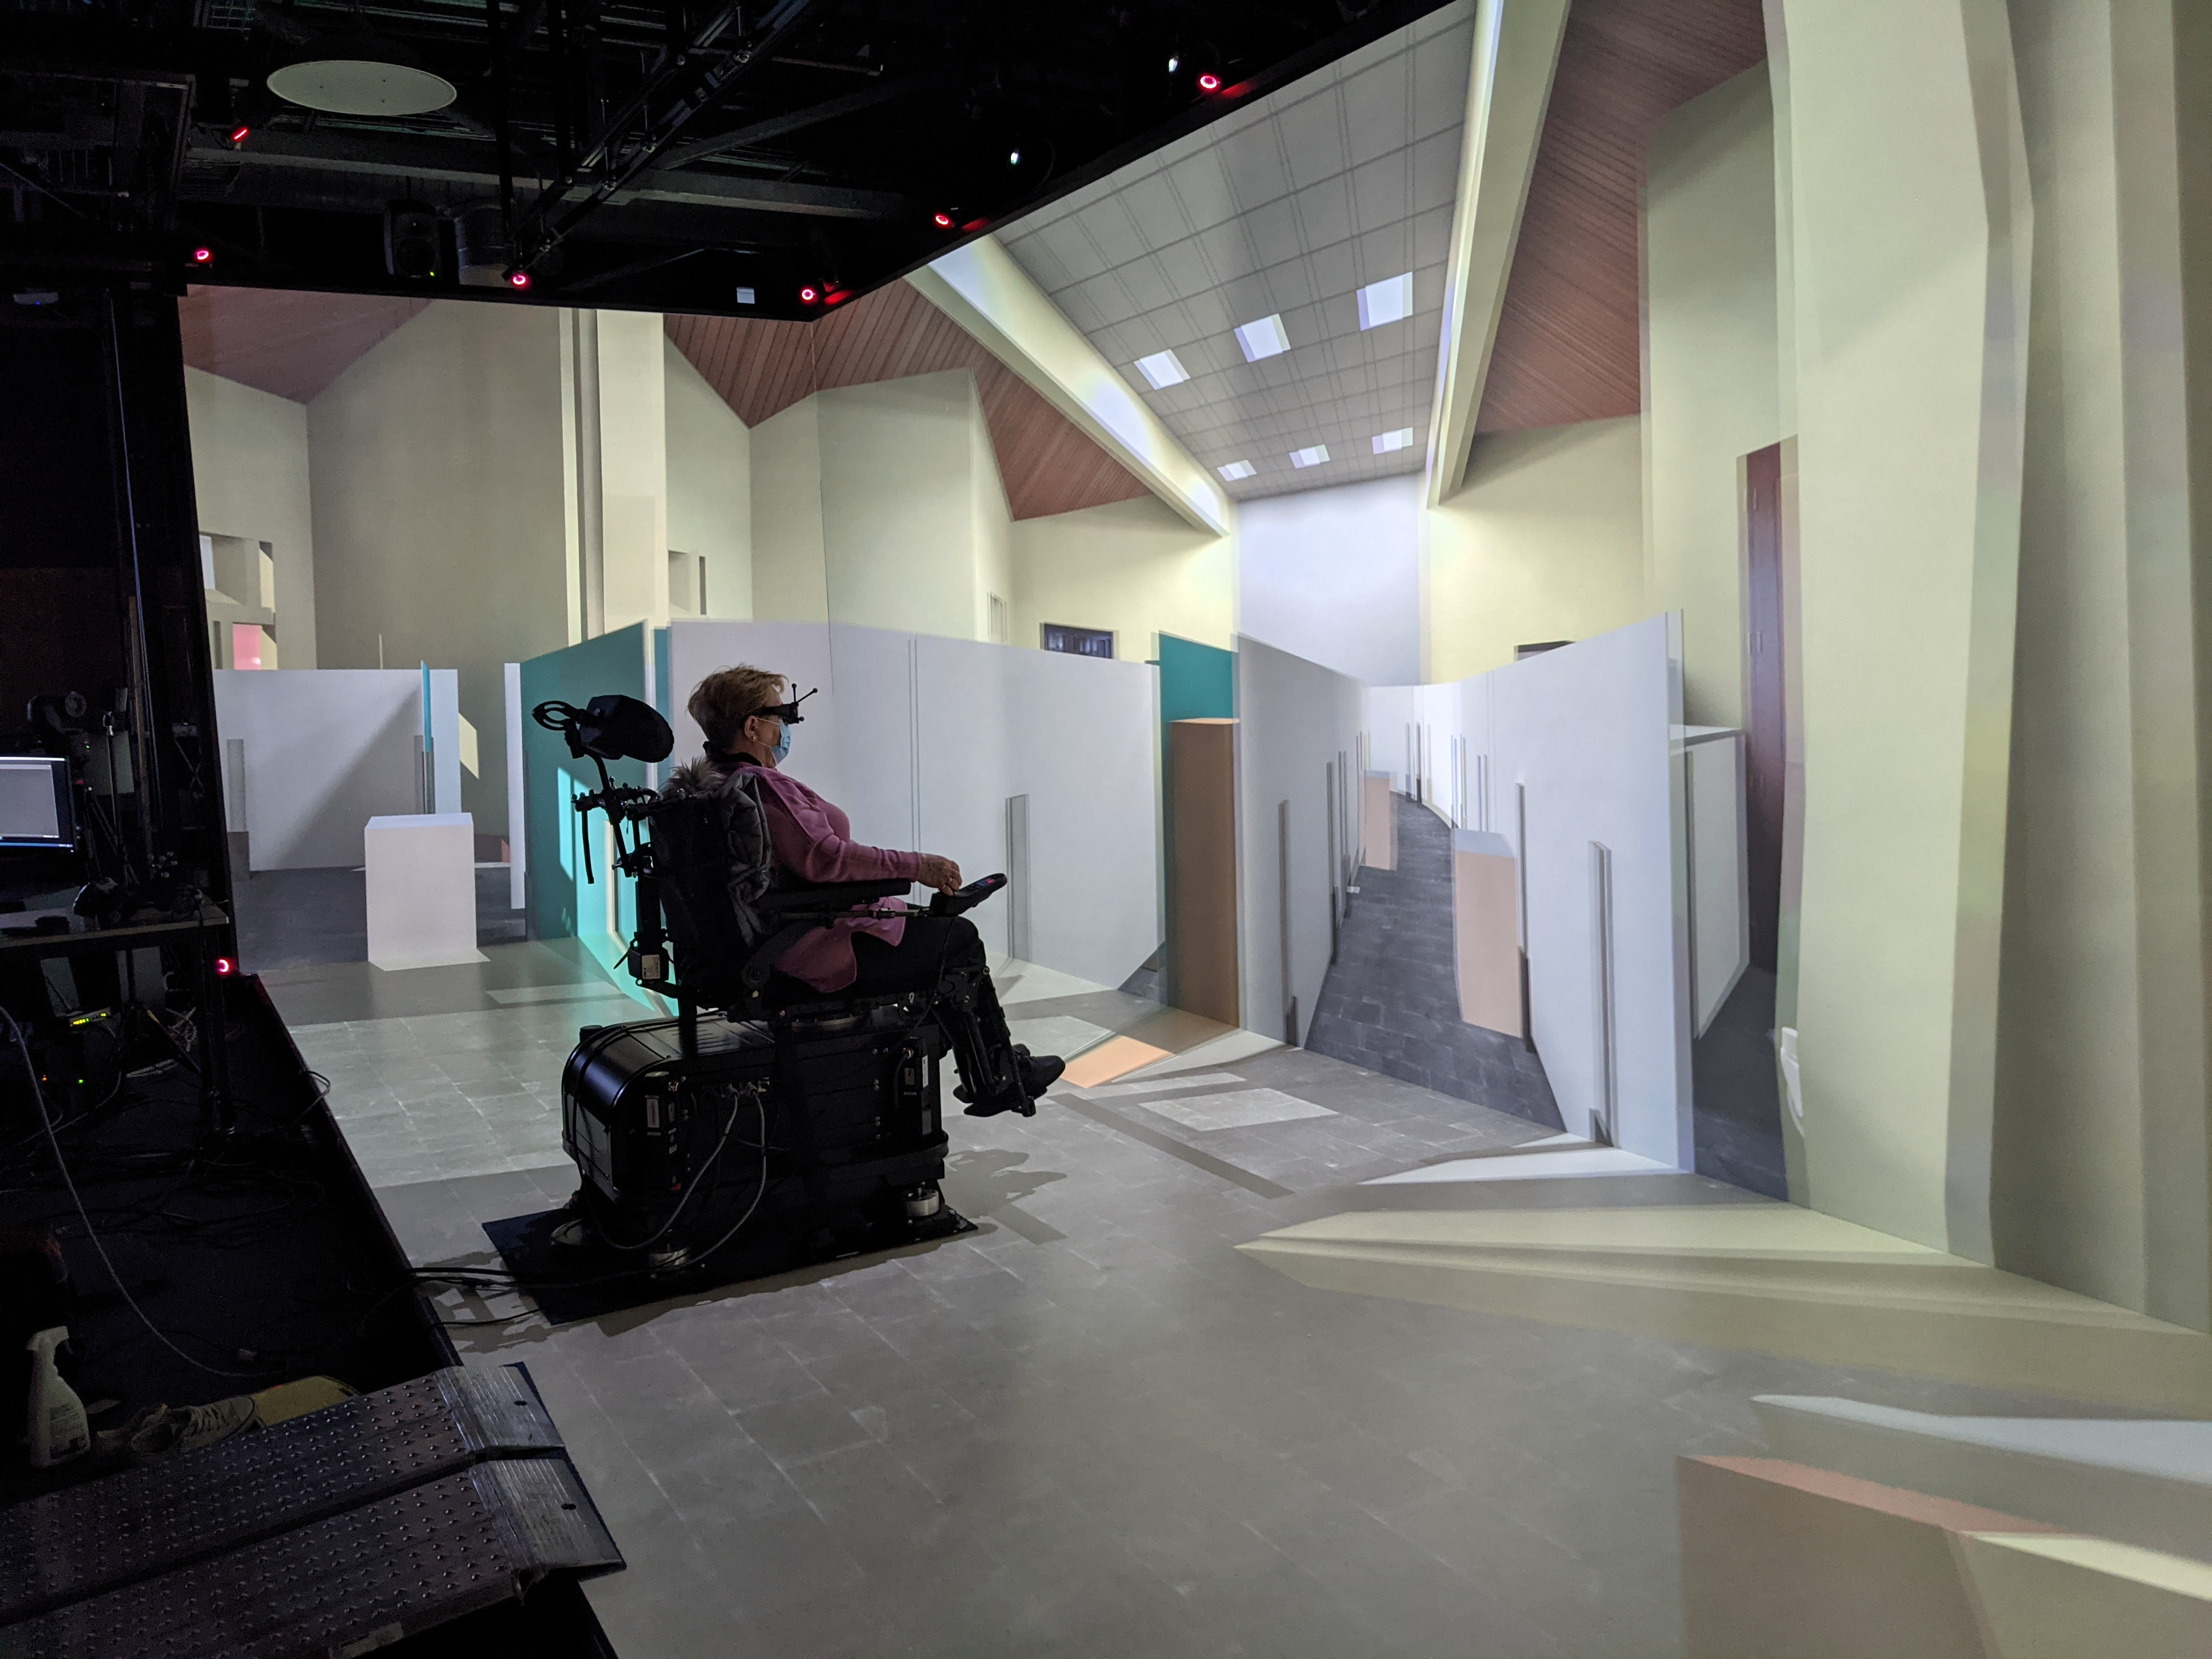 Participant driving in a virtual environment with our simulator and driving in real conditions with a real power wheelchair